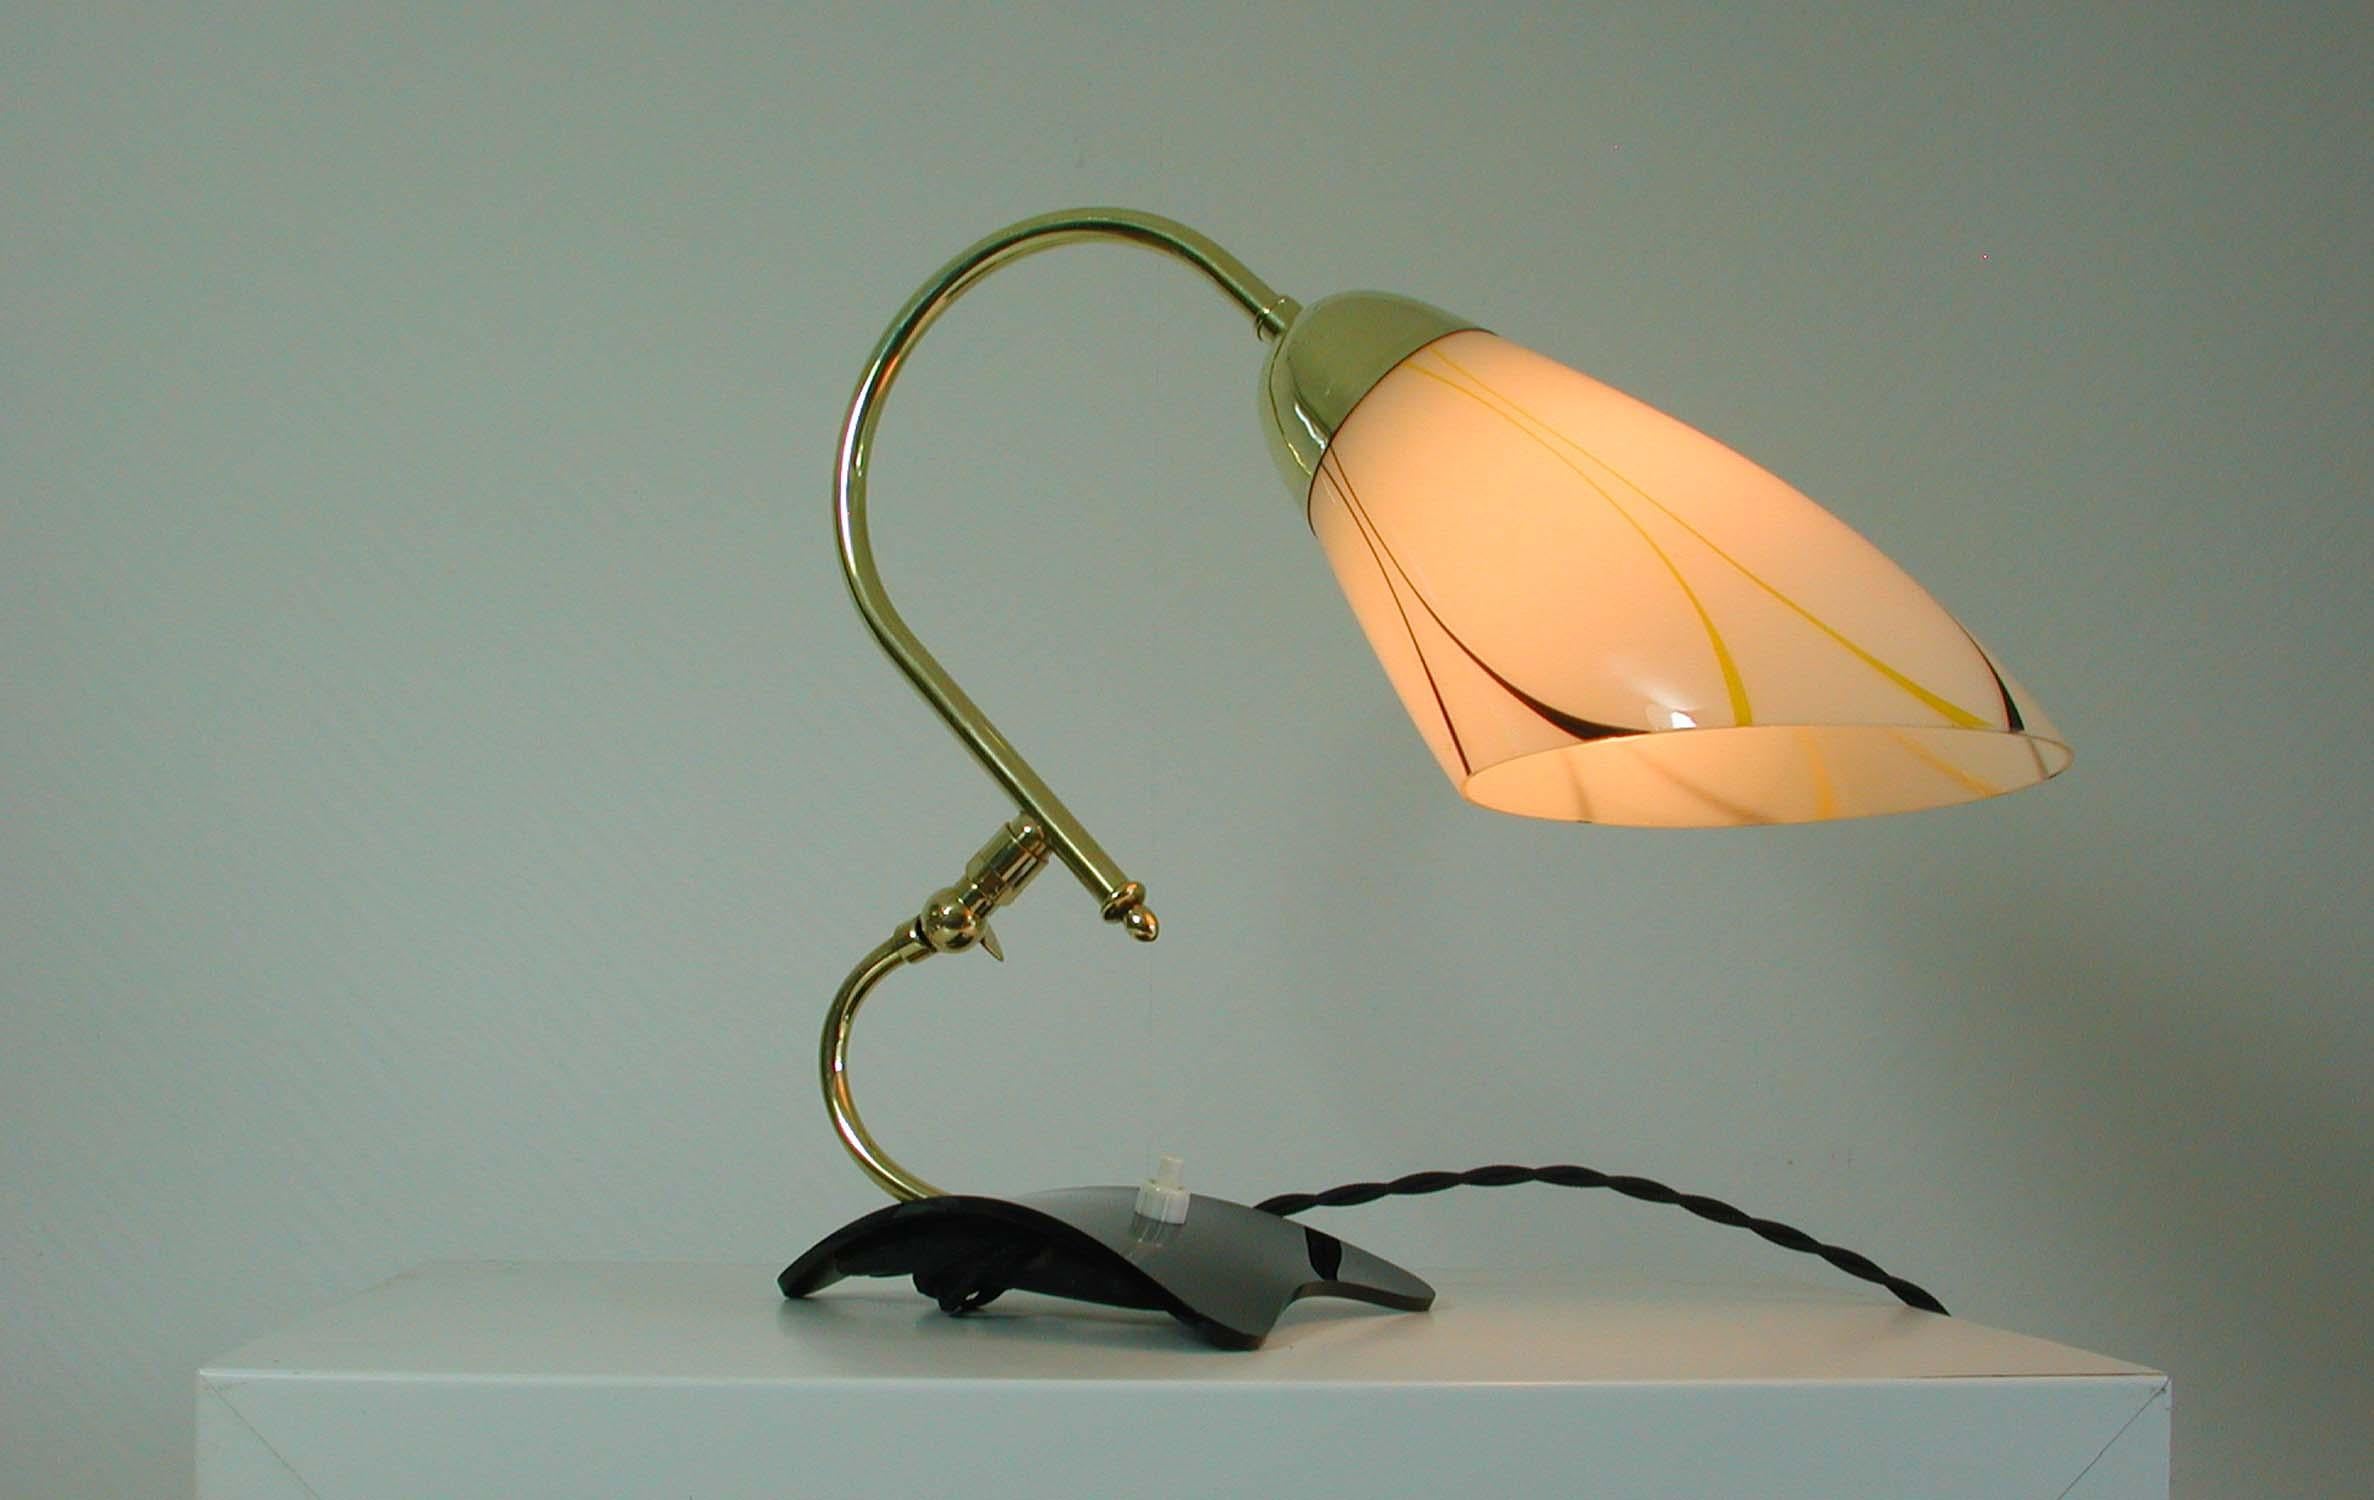 German Midcentury Adjustable Yellow, Black and White Table Lamp, 1950s For Sale 4